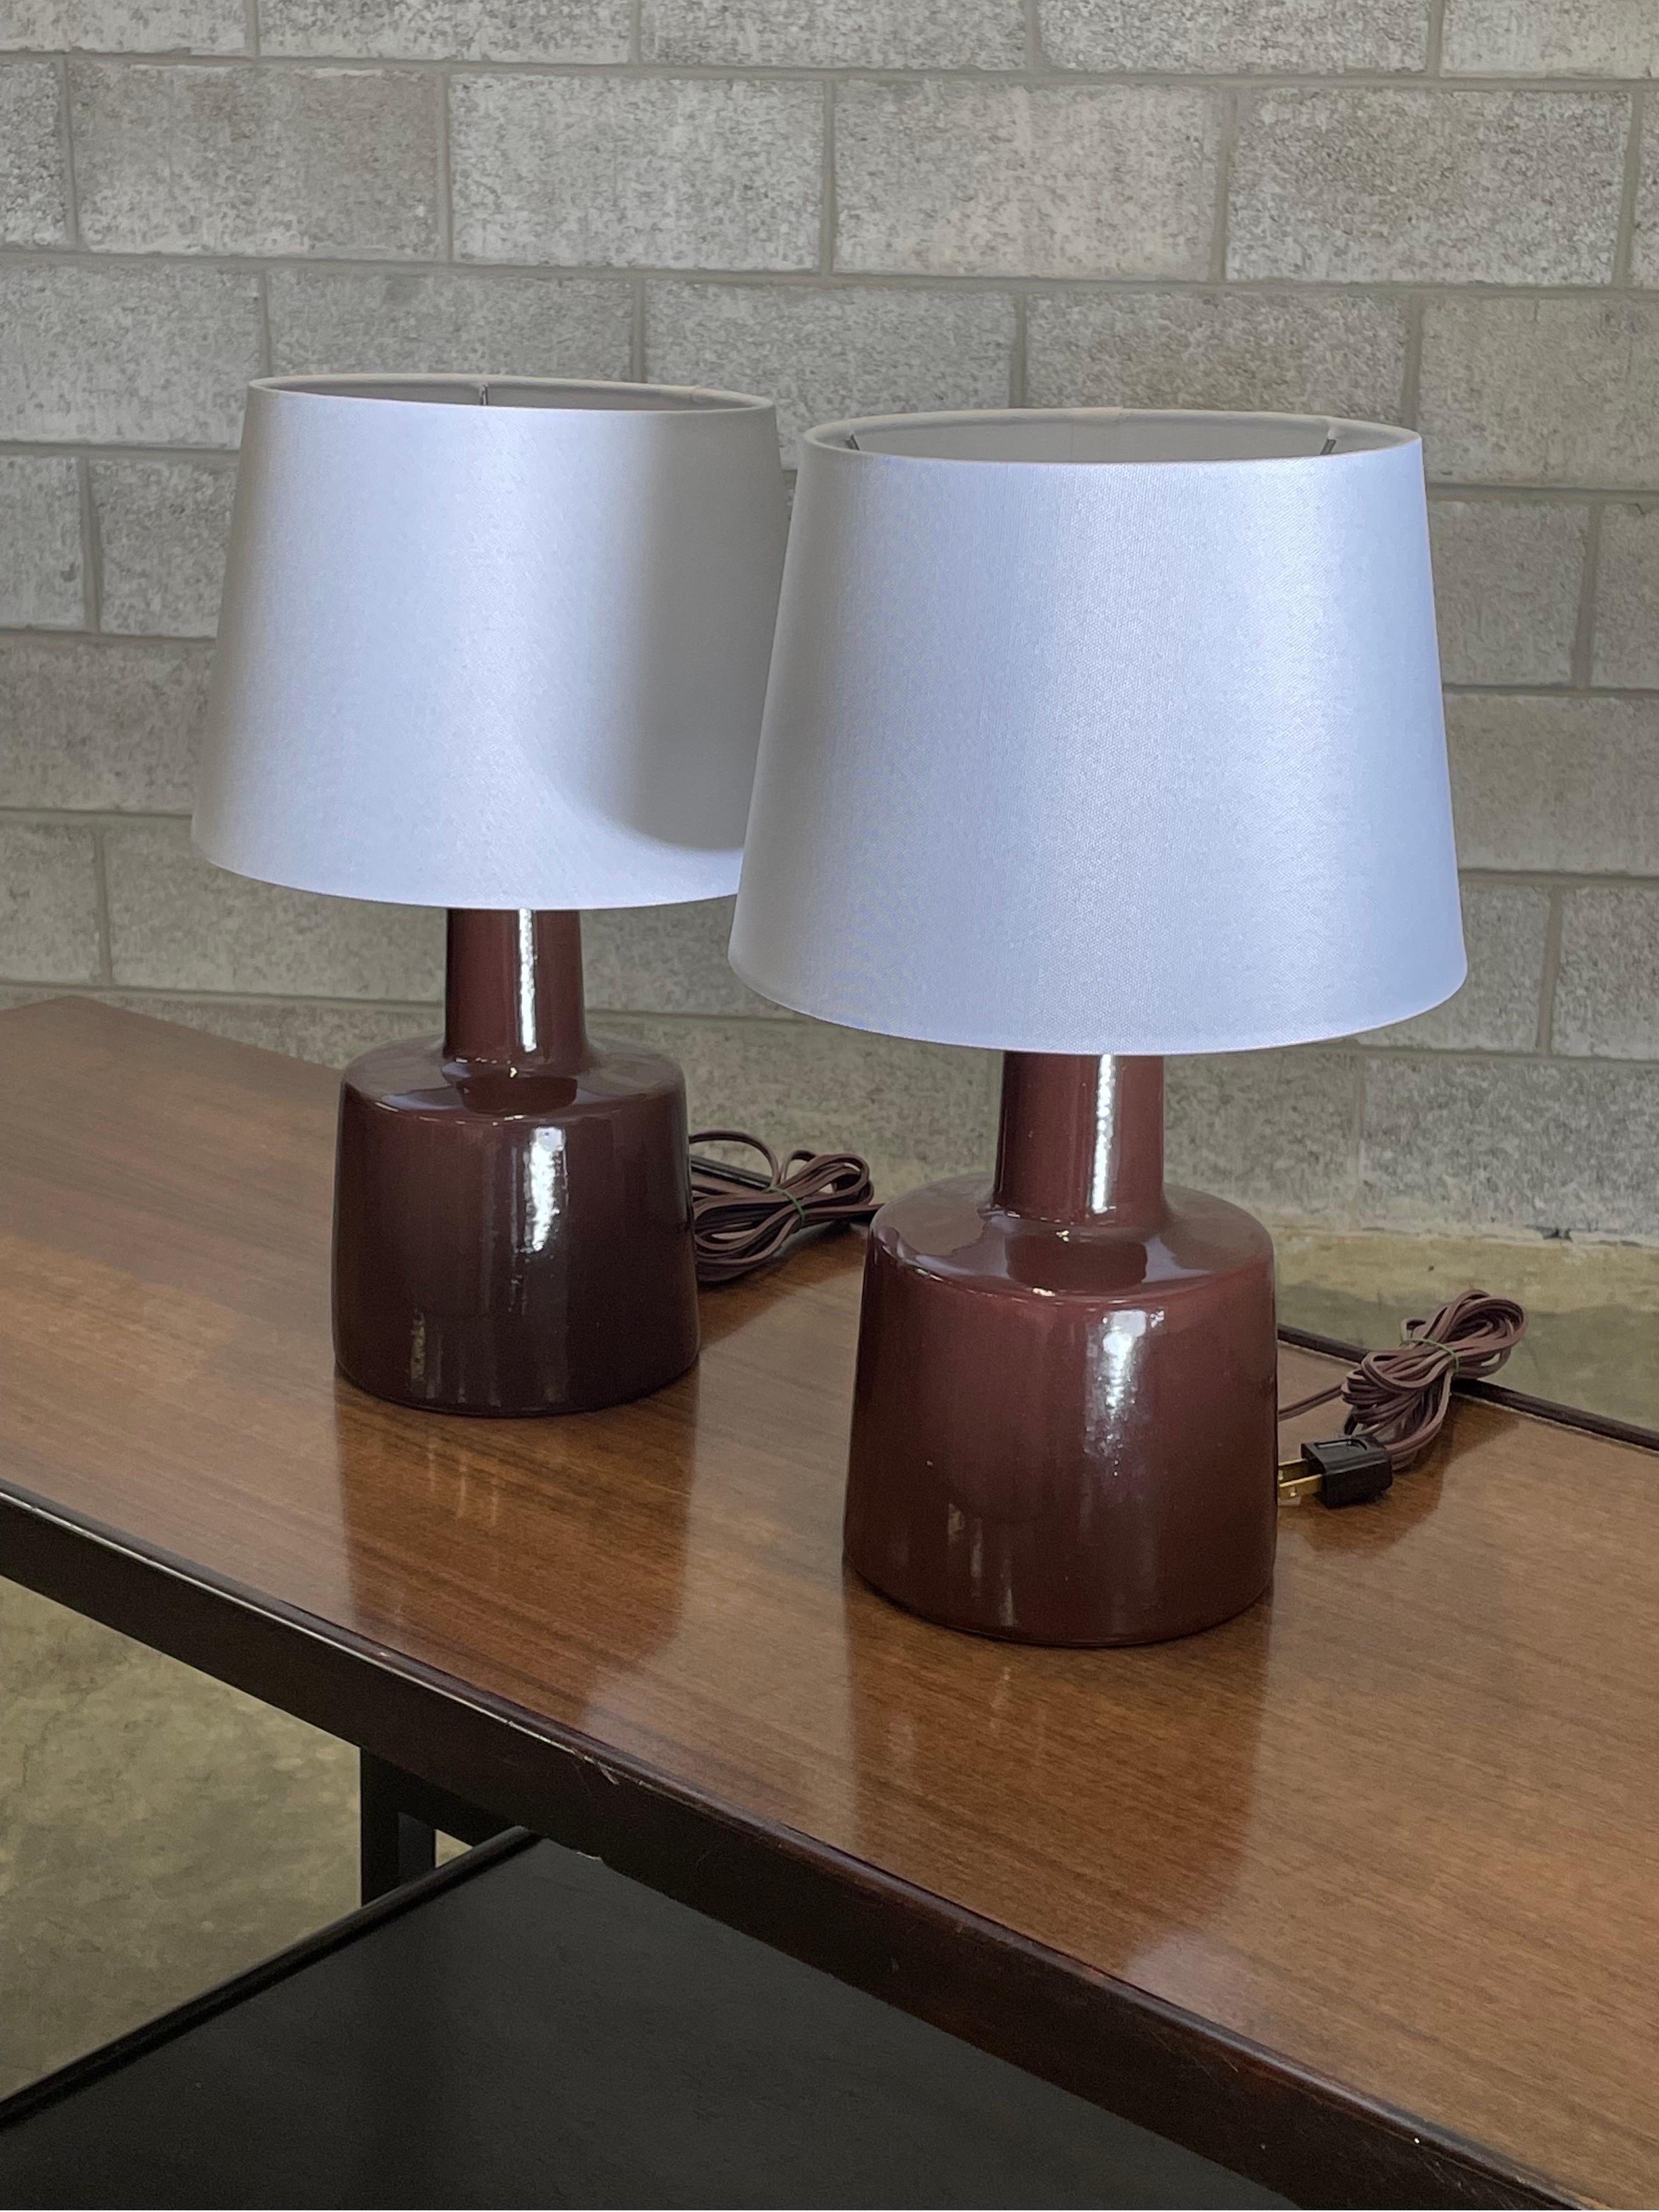 Table lamps designed by ceramicist duo Jane and Gordon Martz for Marshall Studios. Color is dark red/ brown, almost as if a wine.

Overall dimensions: 16” tall 10” wide.
Ceramic portion only 9” tall 6” across.